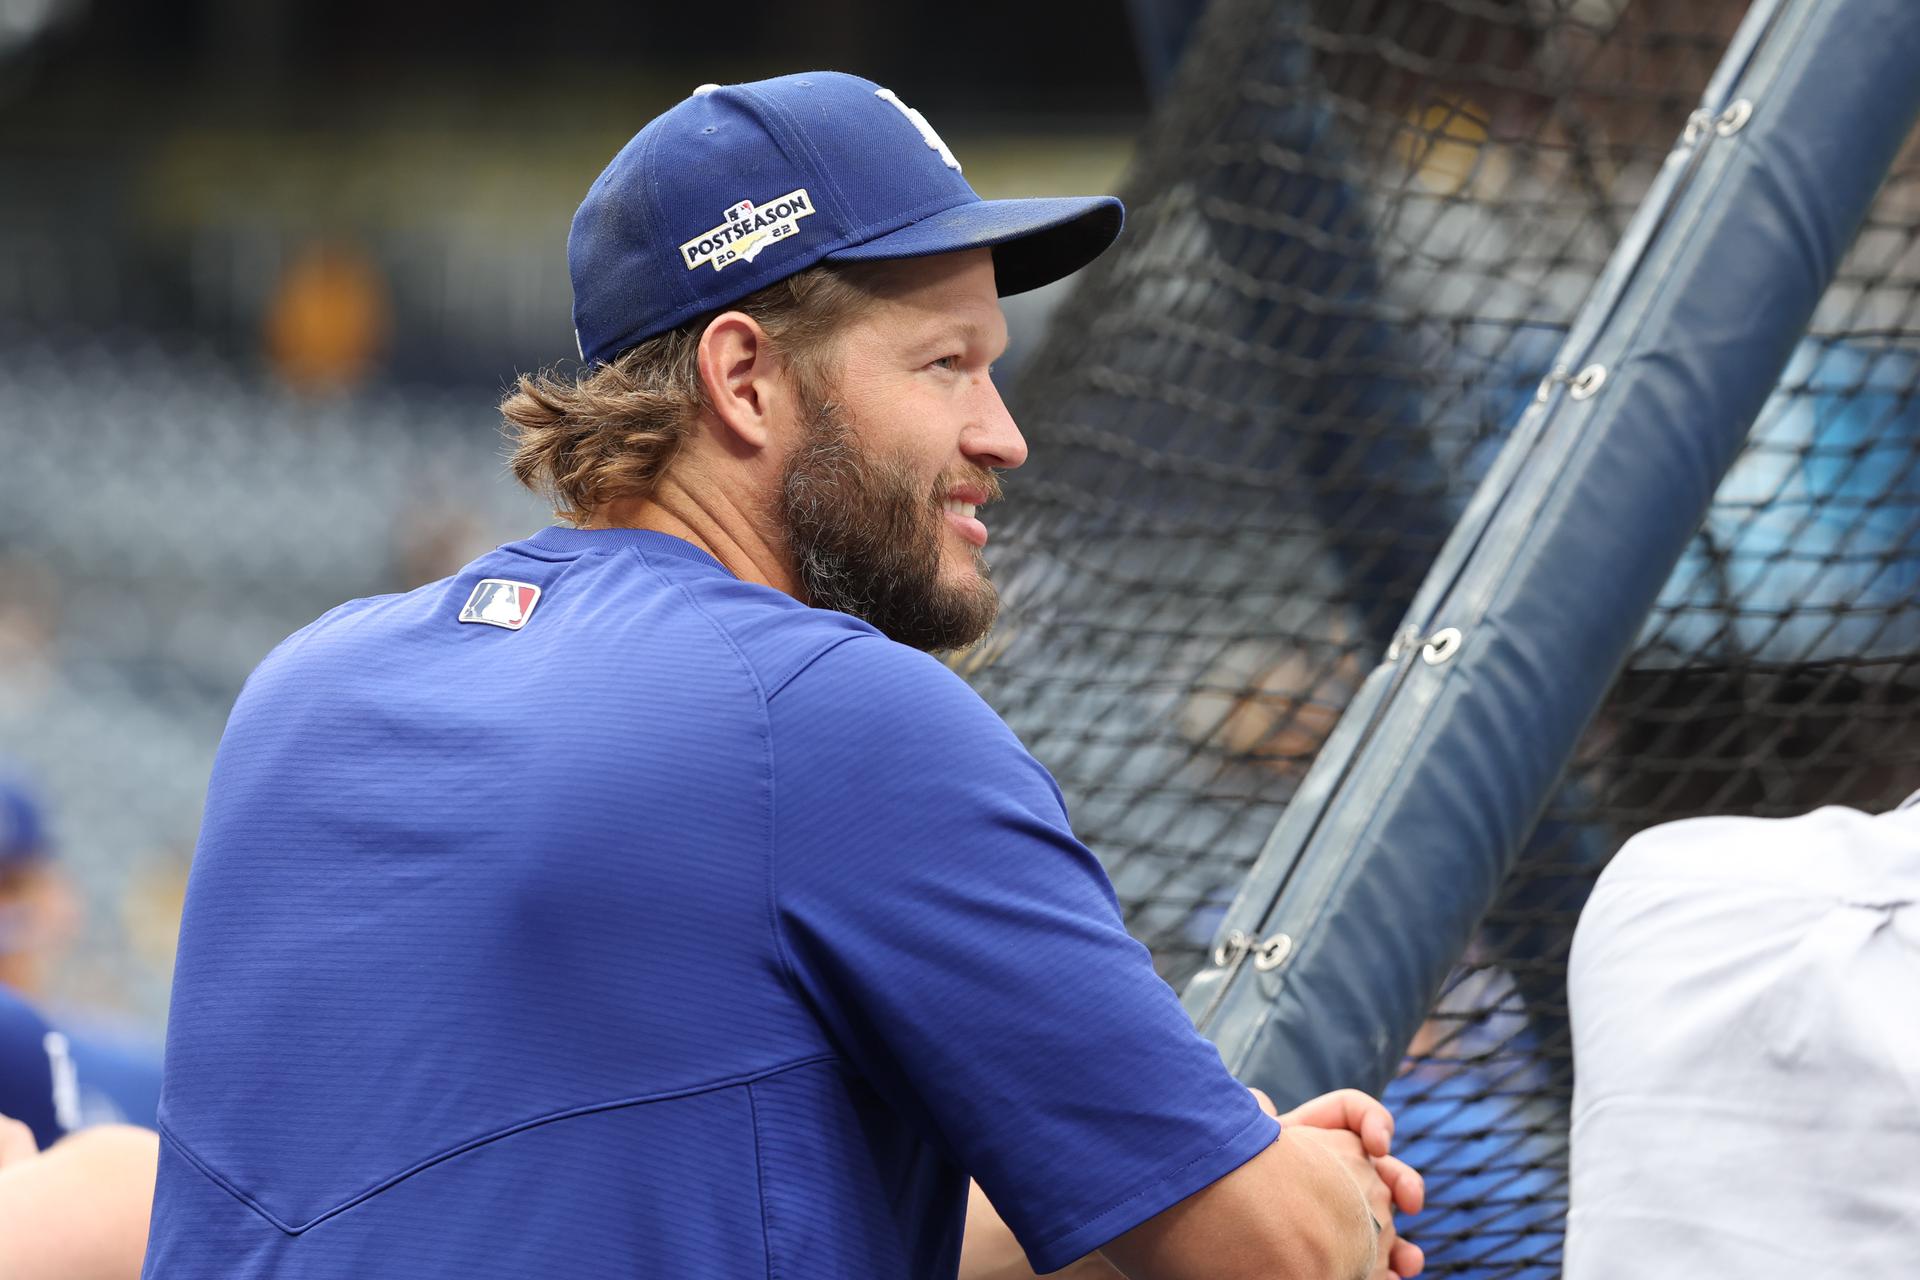 Dodgers pitcher Clayton Kershaw looks on during batting practice